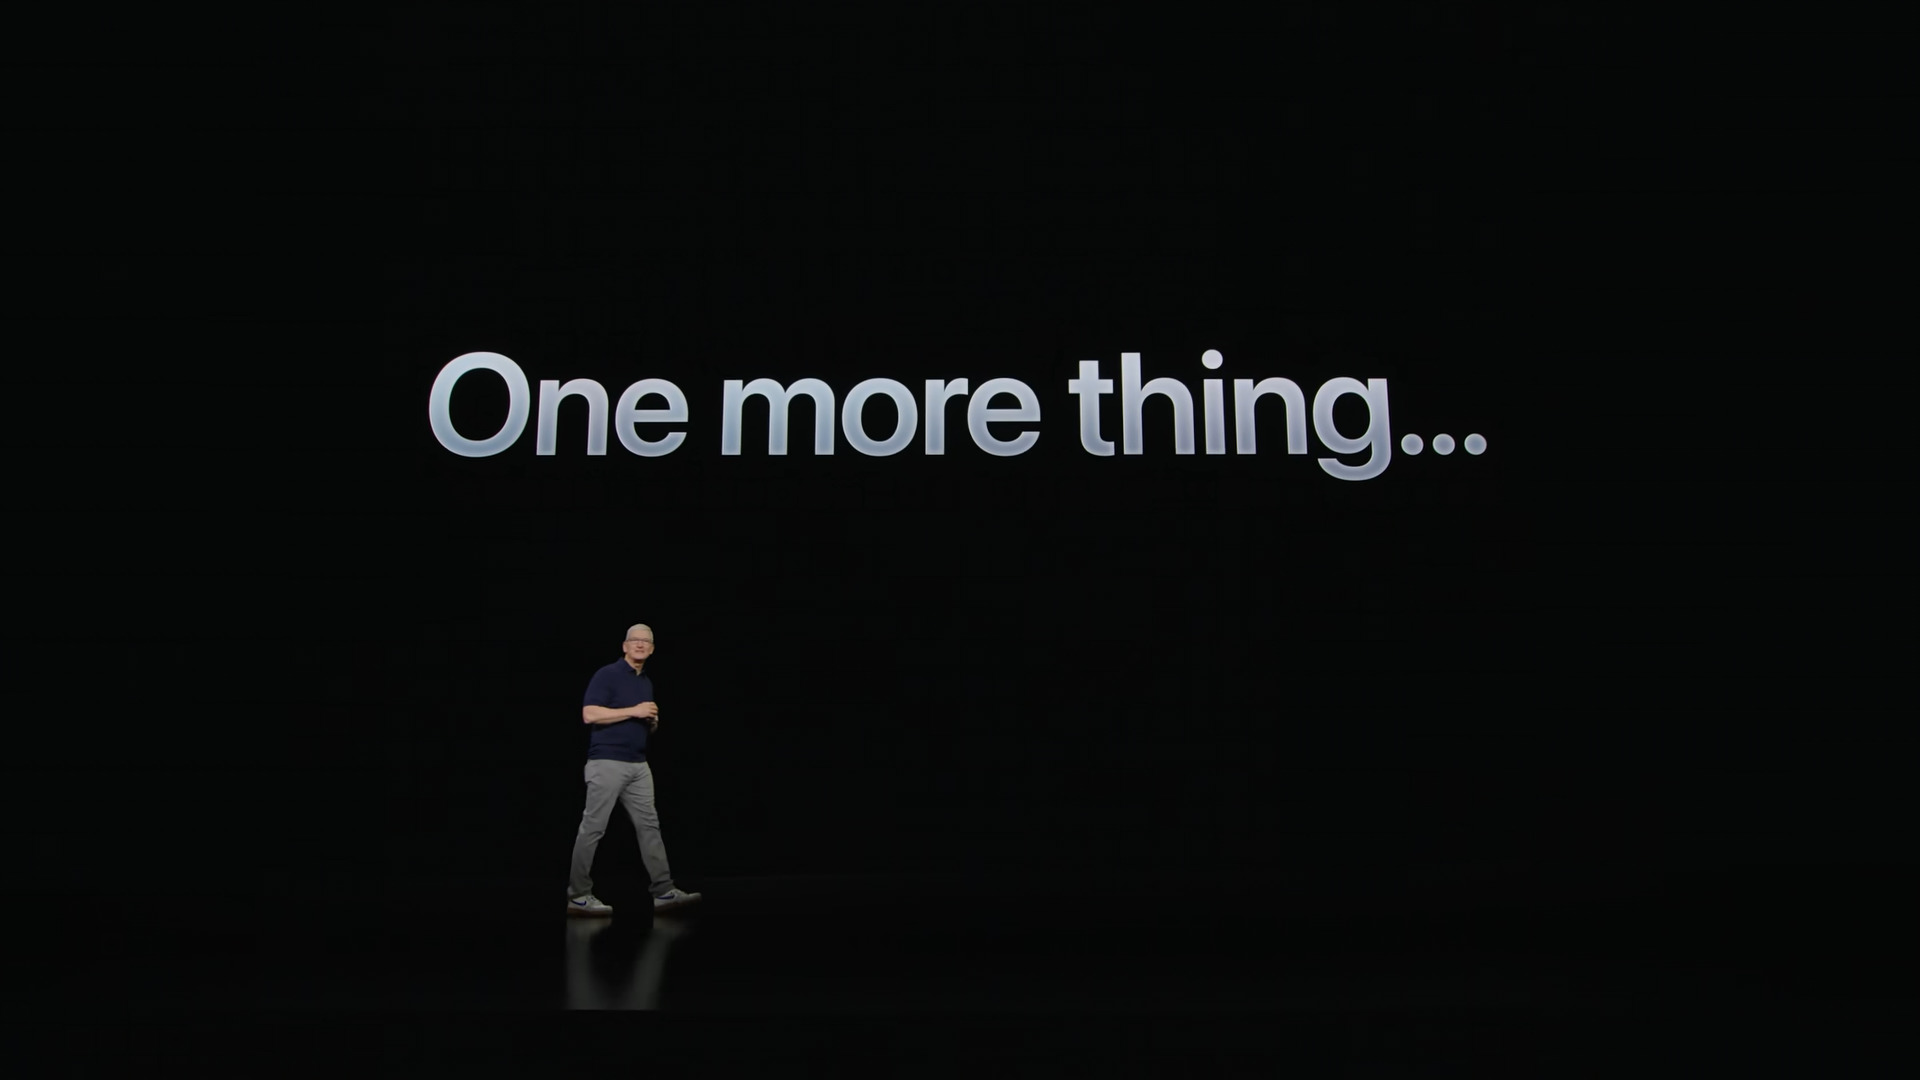 Tim Cook introduces the Apple Vision Pro as 